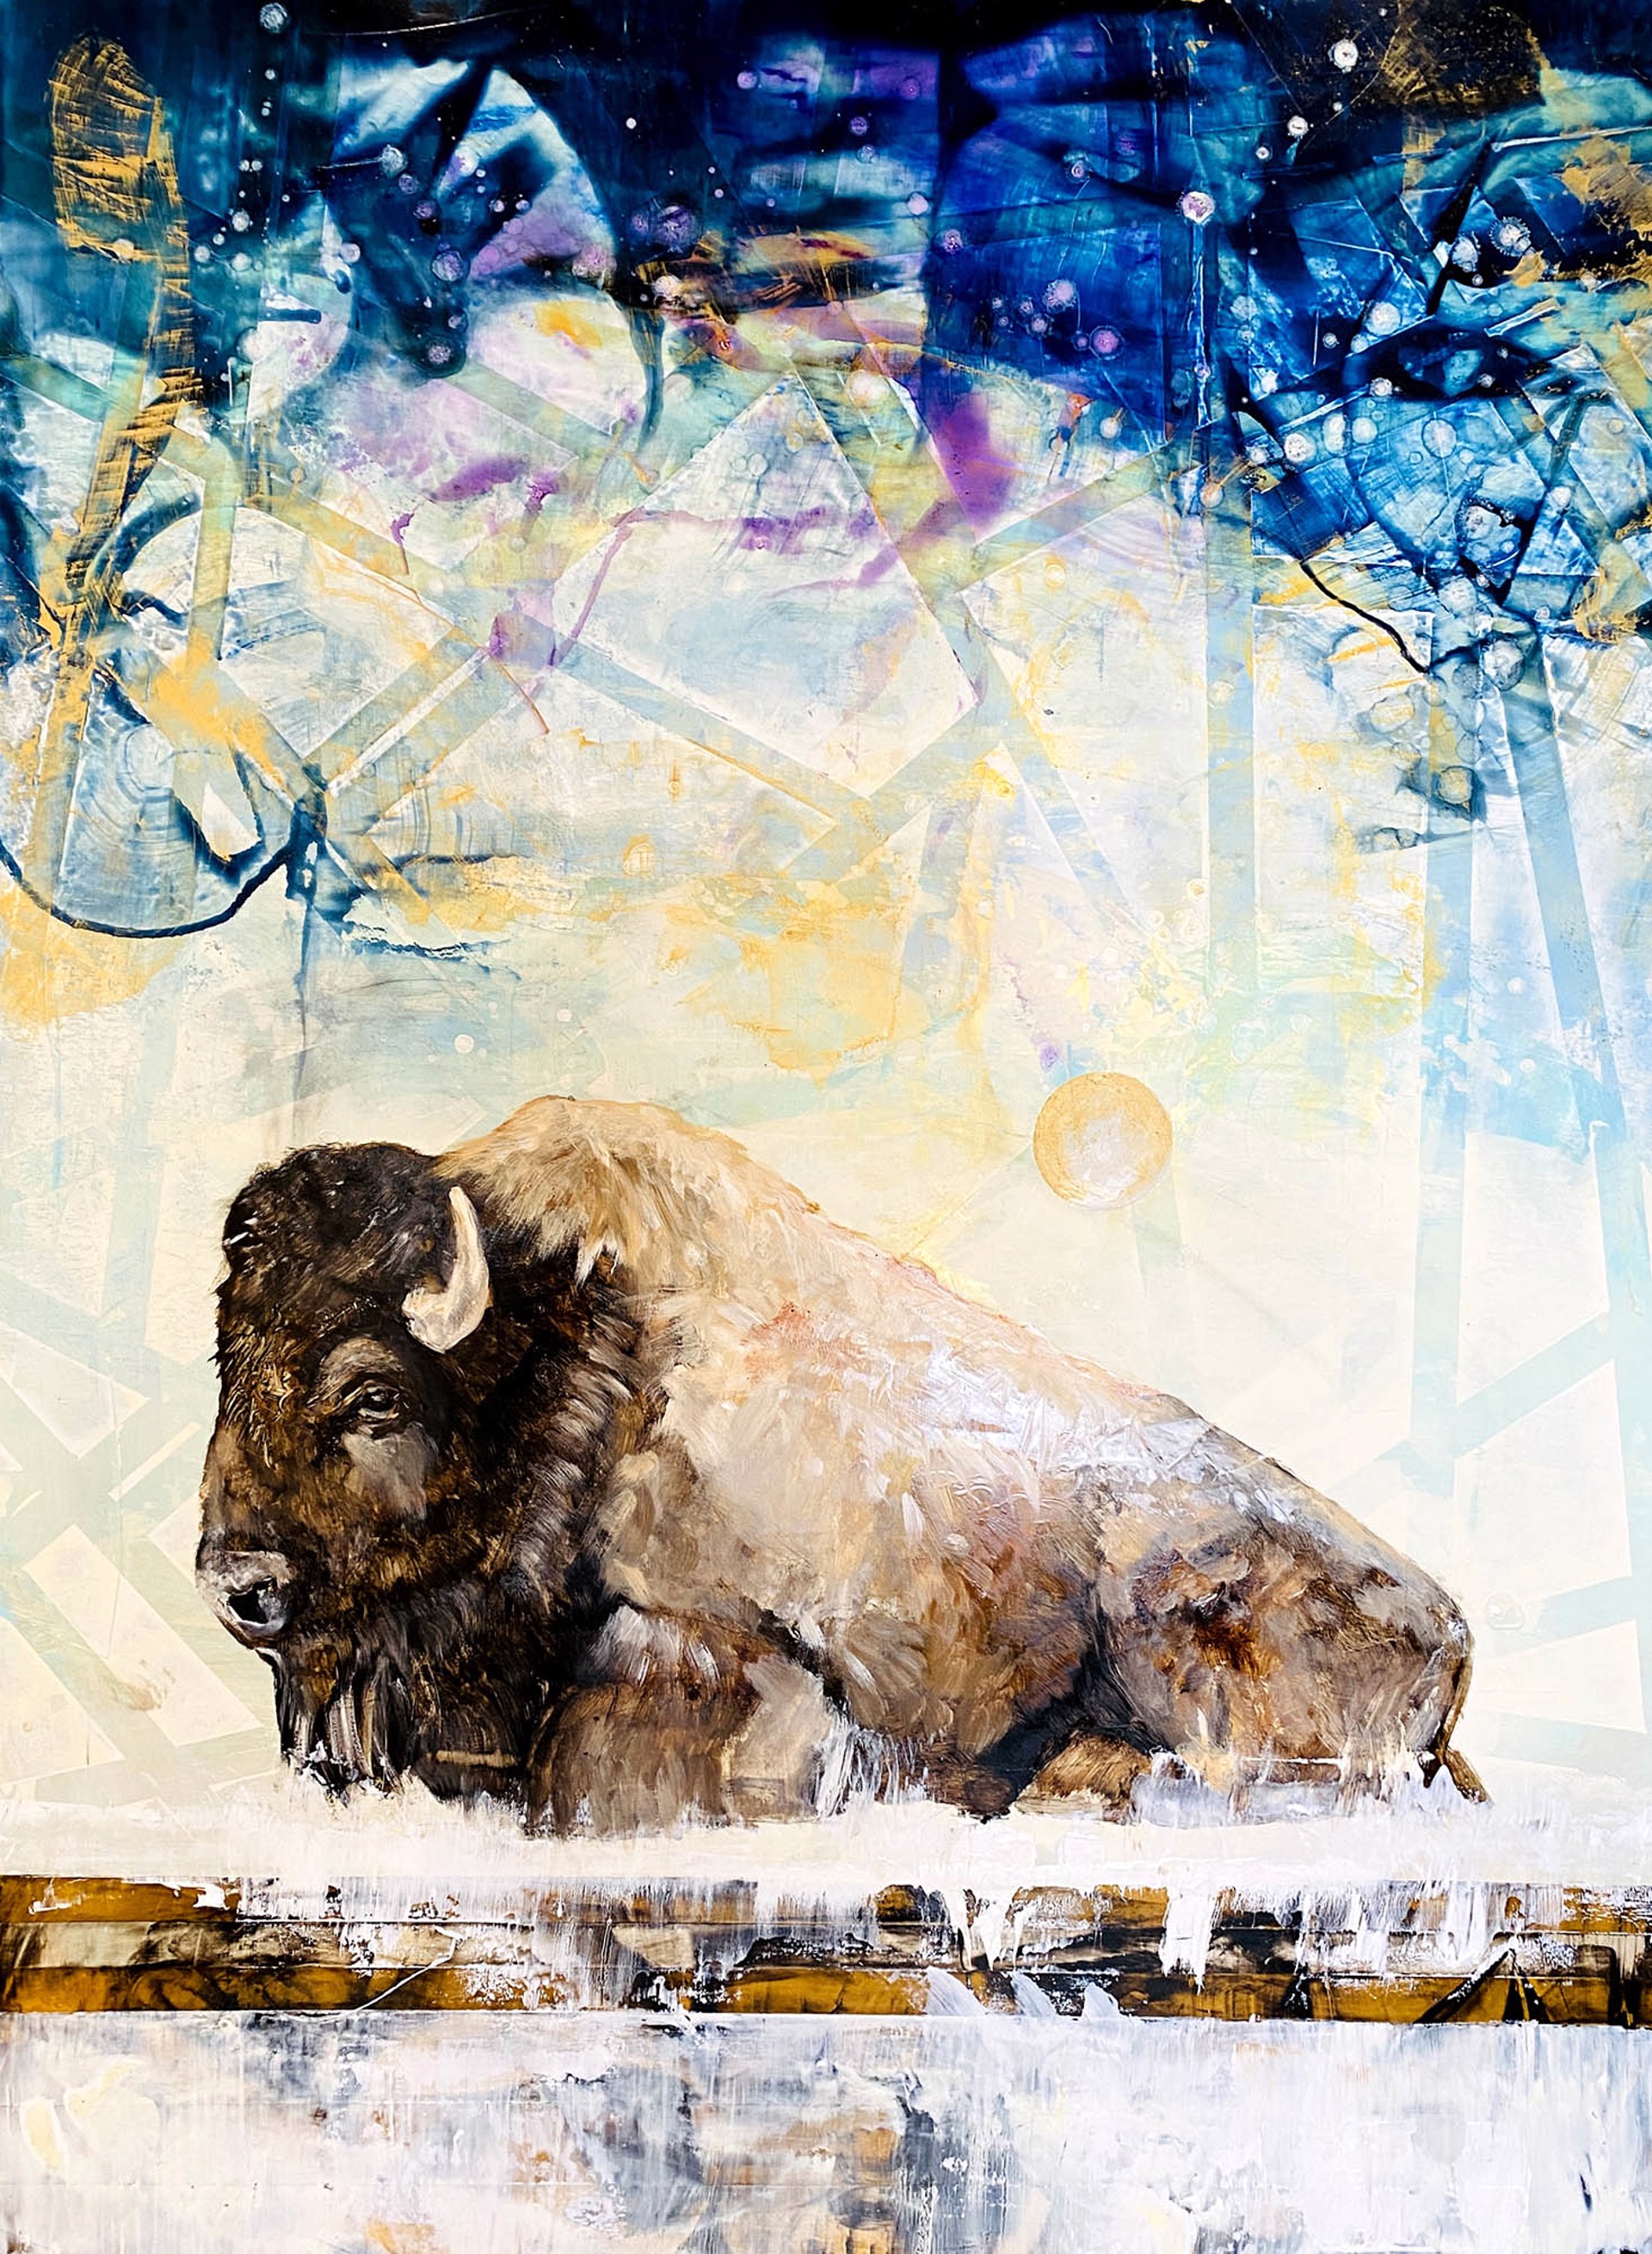 Original Oil Painting Featuring A Laying Bison On Abstract Background Resembling Starry Night Sky